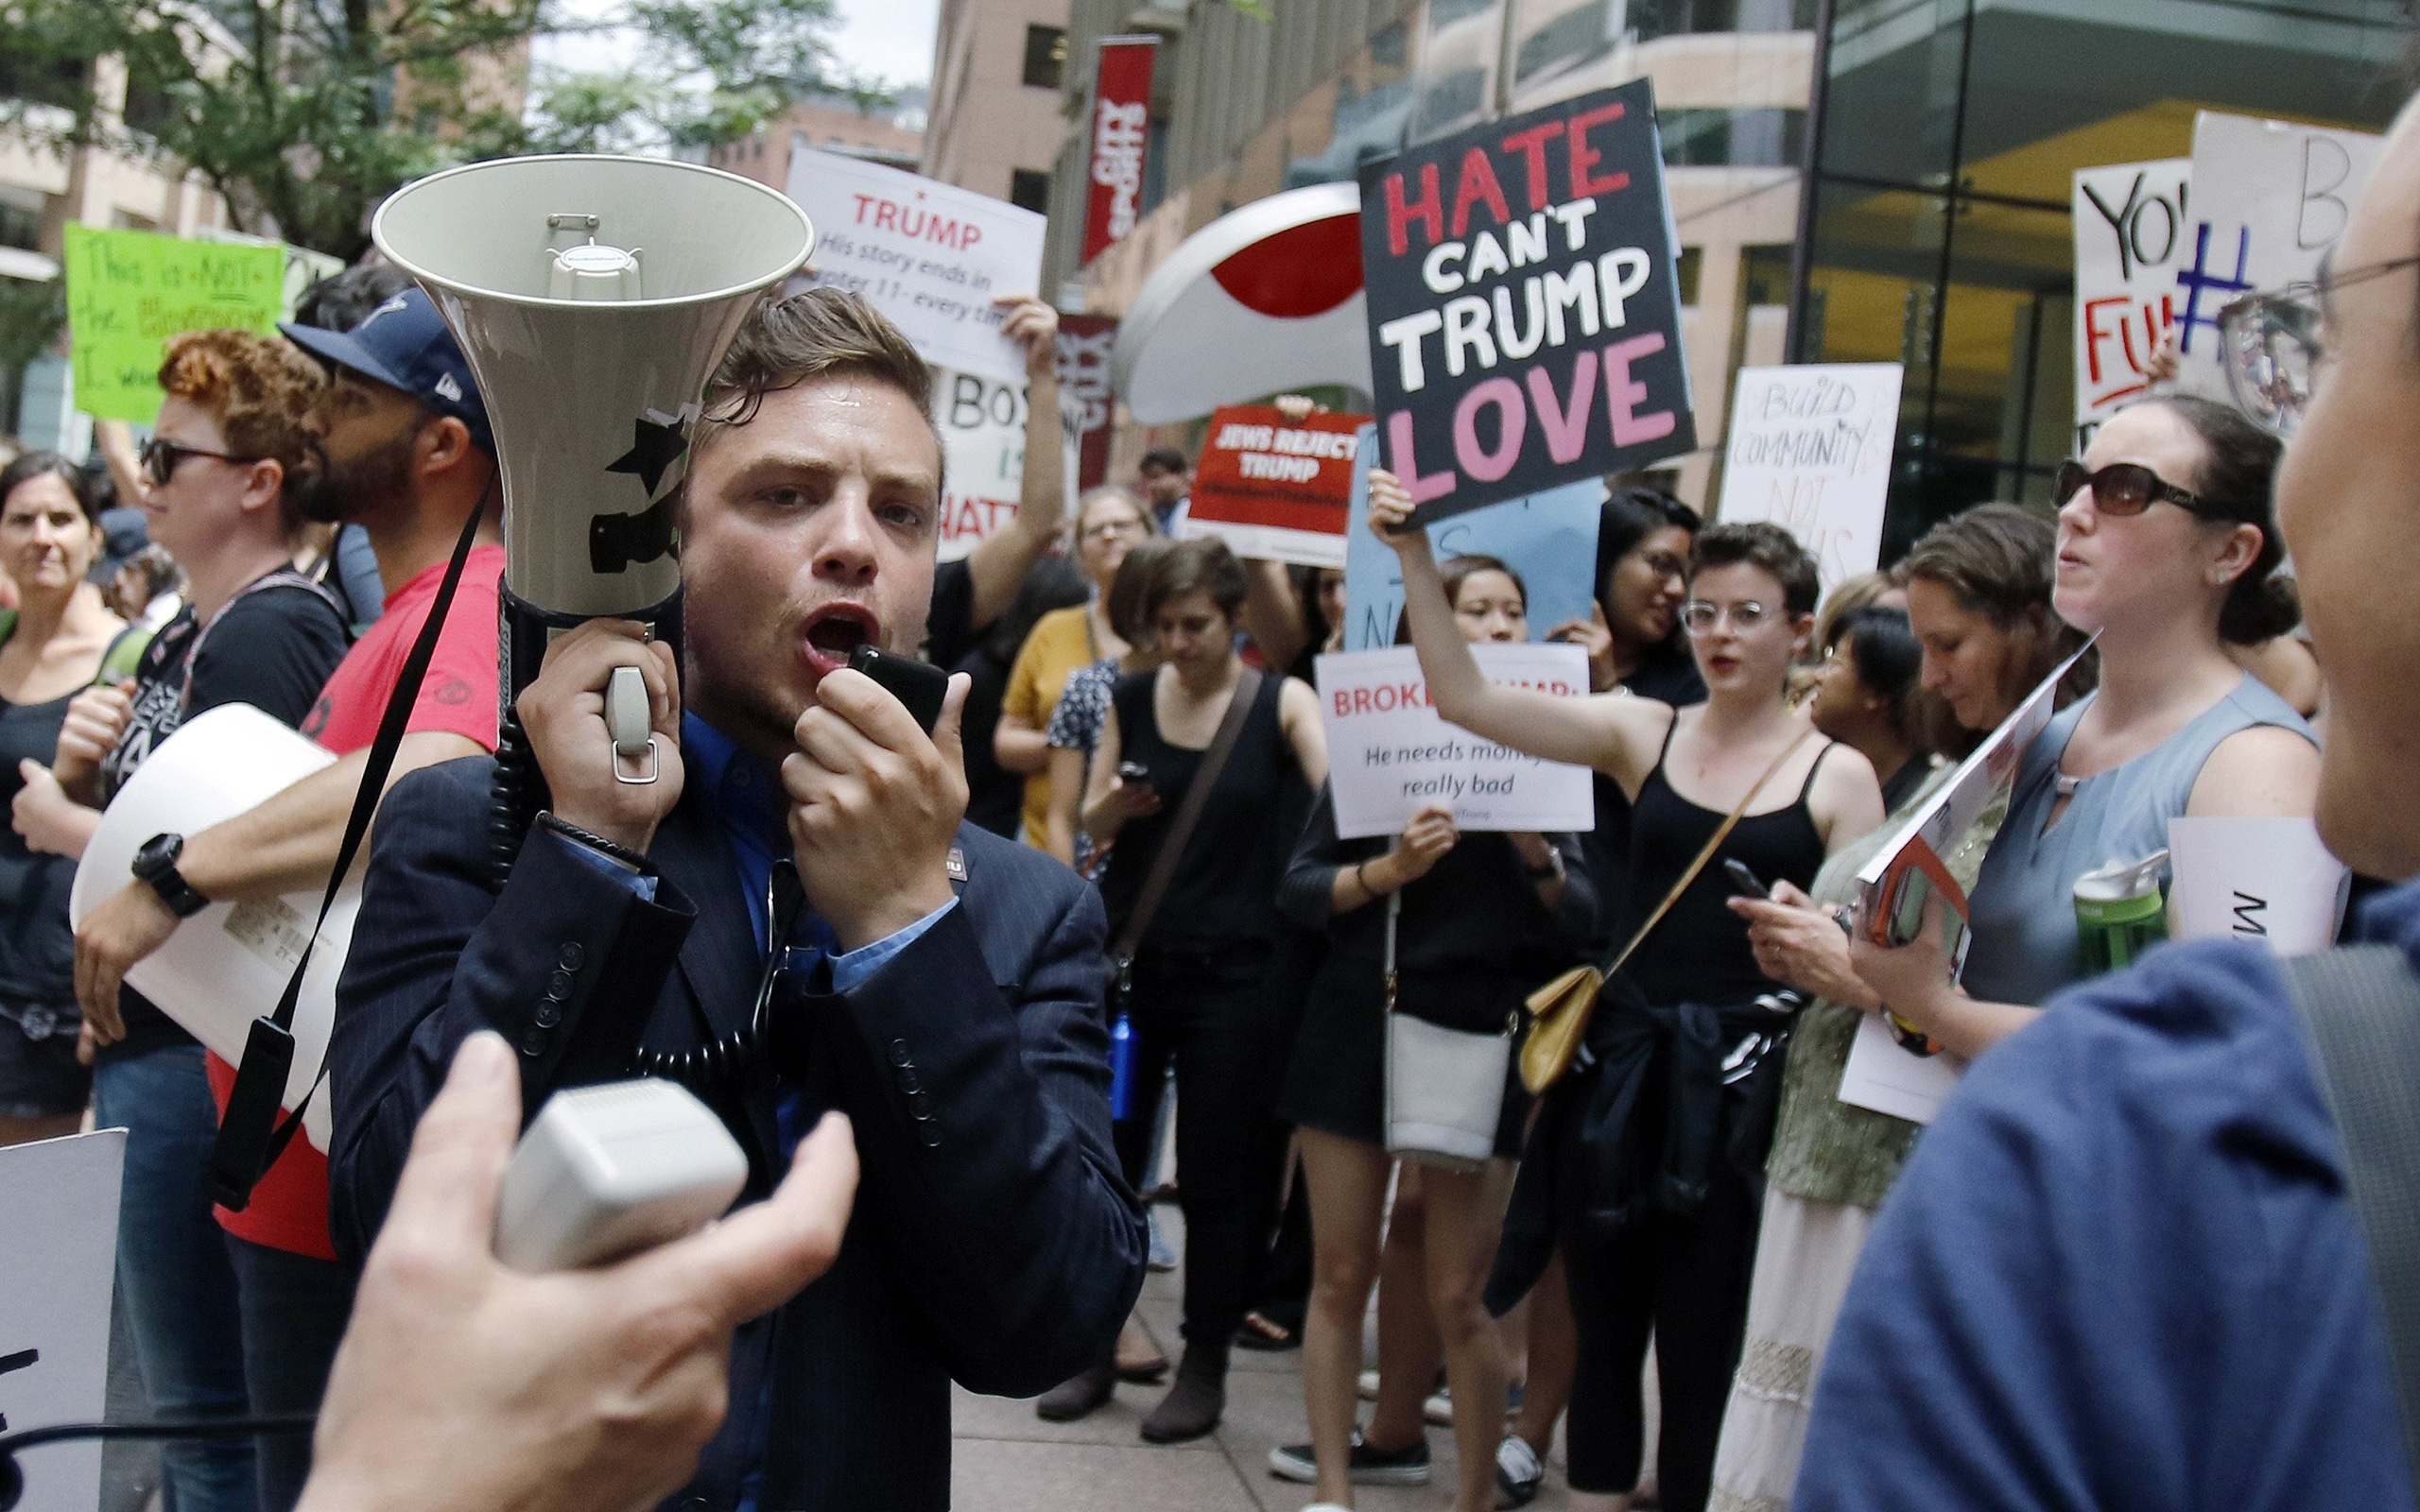 Protestors chant outside a downtown hotel where Donald Trump was holding a lunchtime fundraiser in Boston, June 29, 2016. (Bill Sikes—AP)